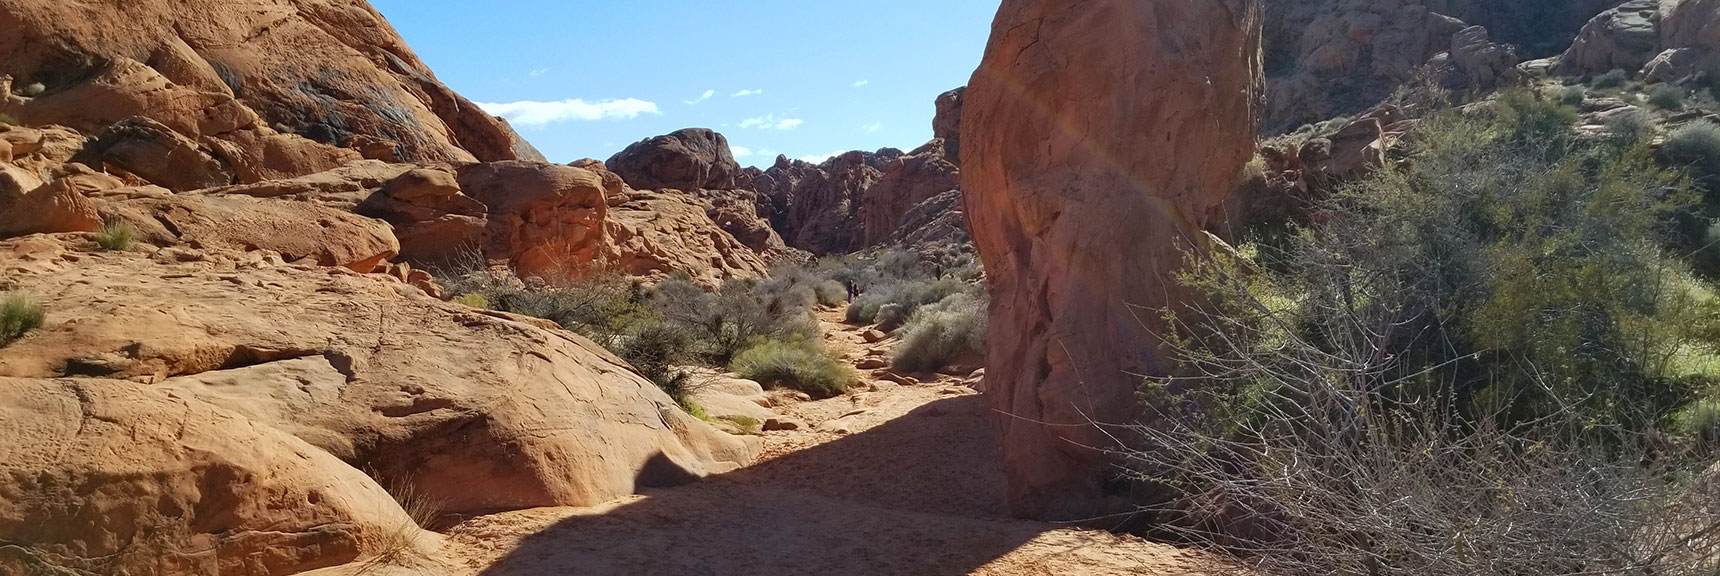 Mouse's Tank Trail, Valley of Fire State Park, Highest Concentration of Petroglyphs in Nevada